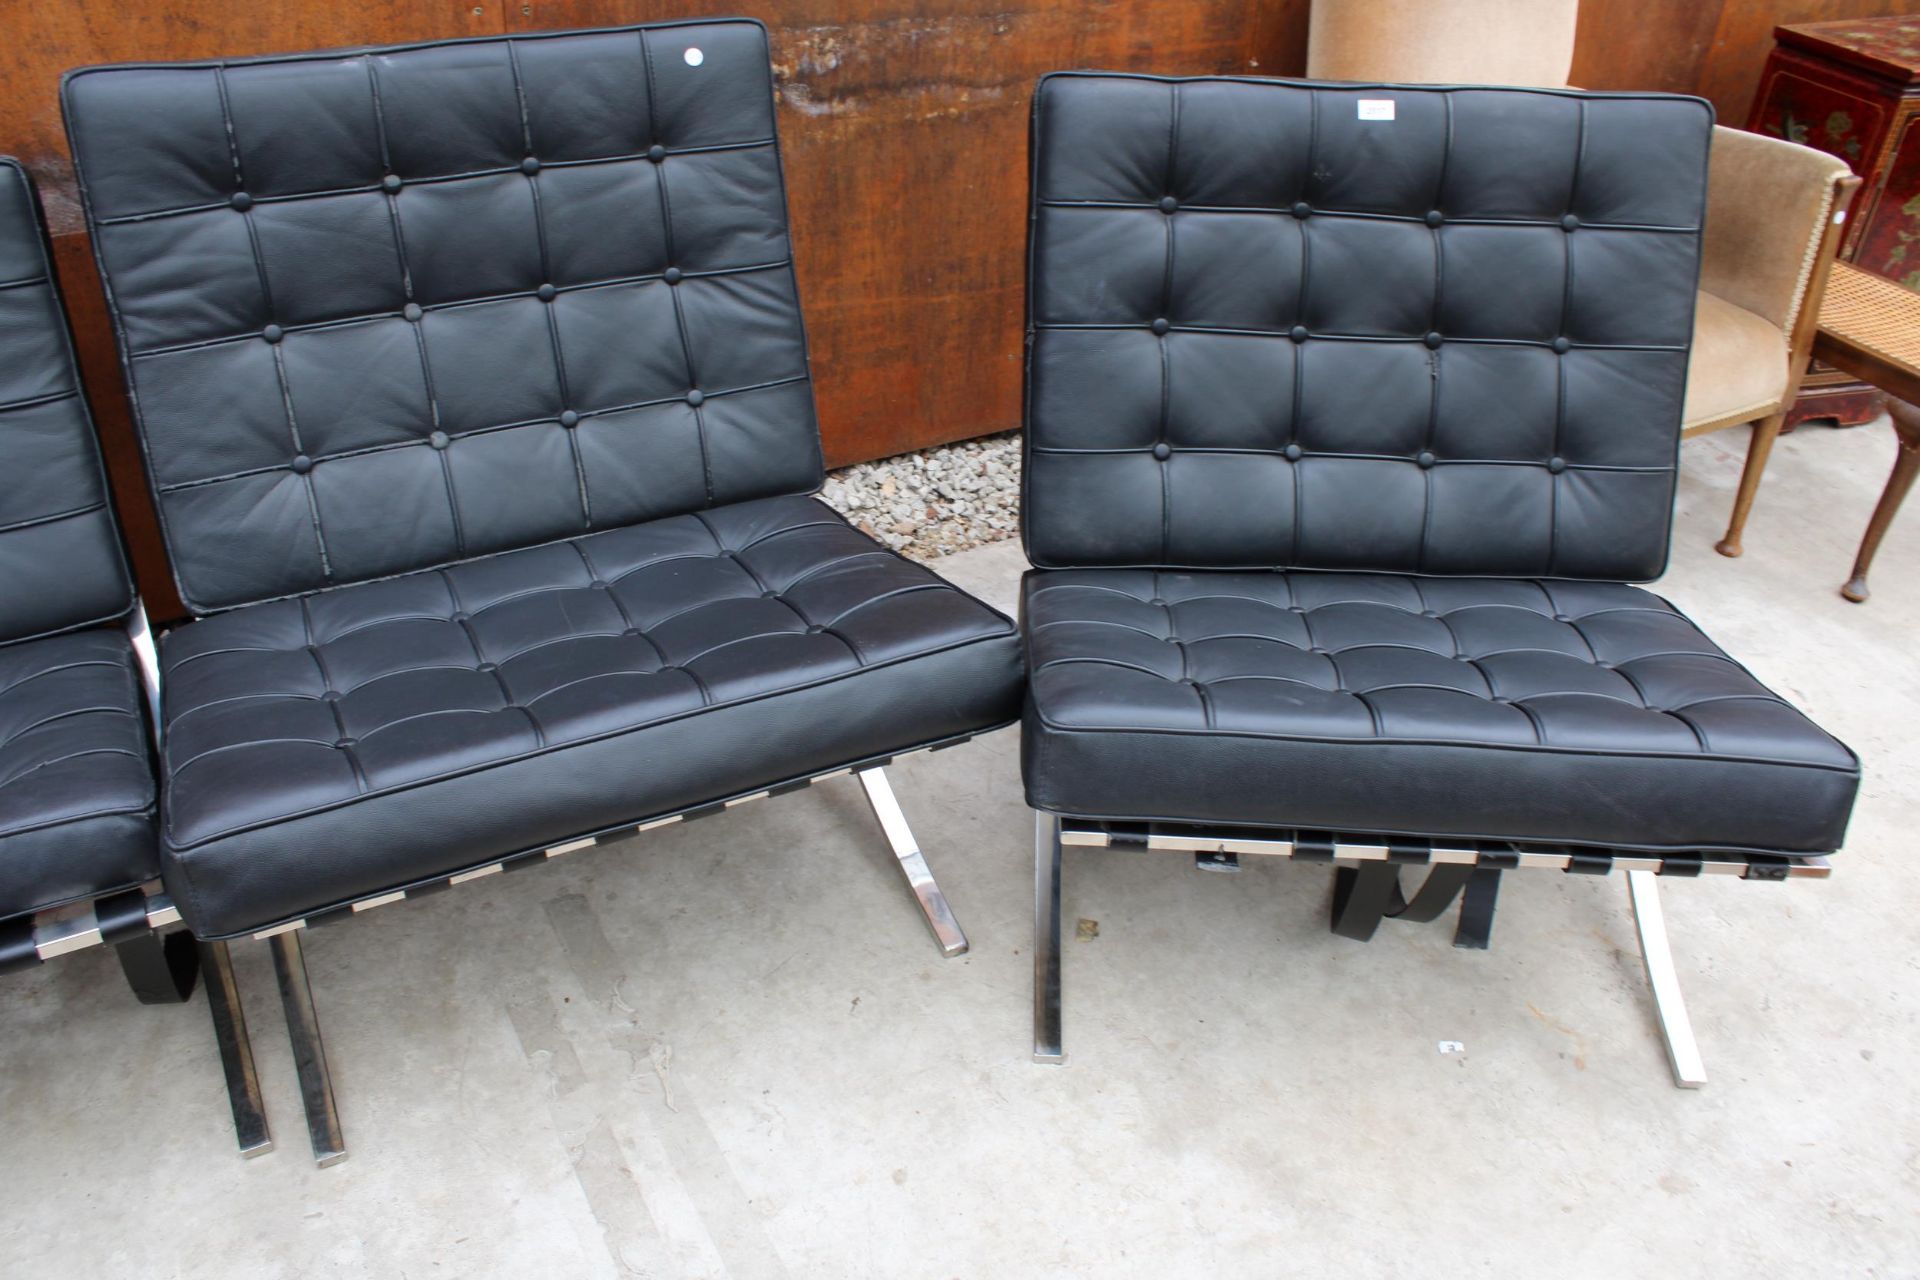 A PAIR OF BLACK BARCELONA STYLE CHAIRS ON POLISHED CHROME X FRAME LEGS